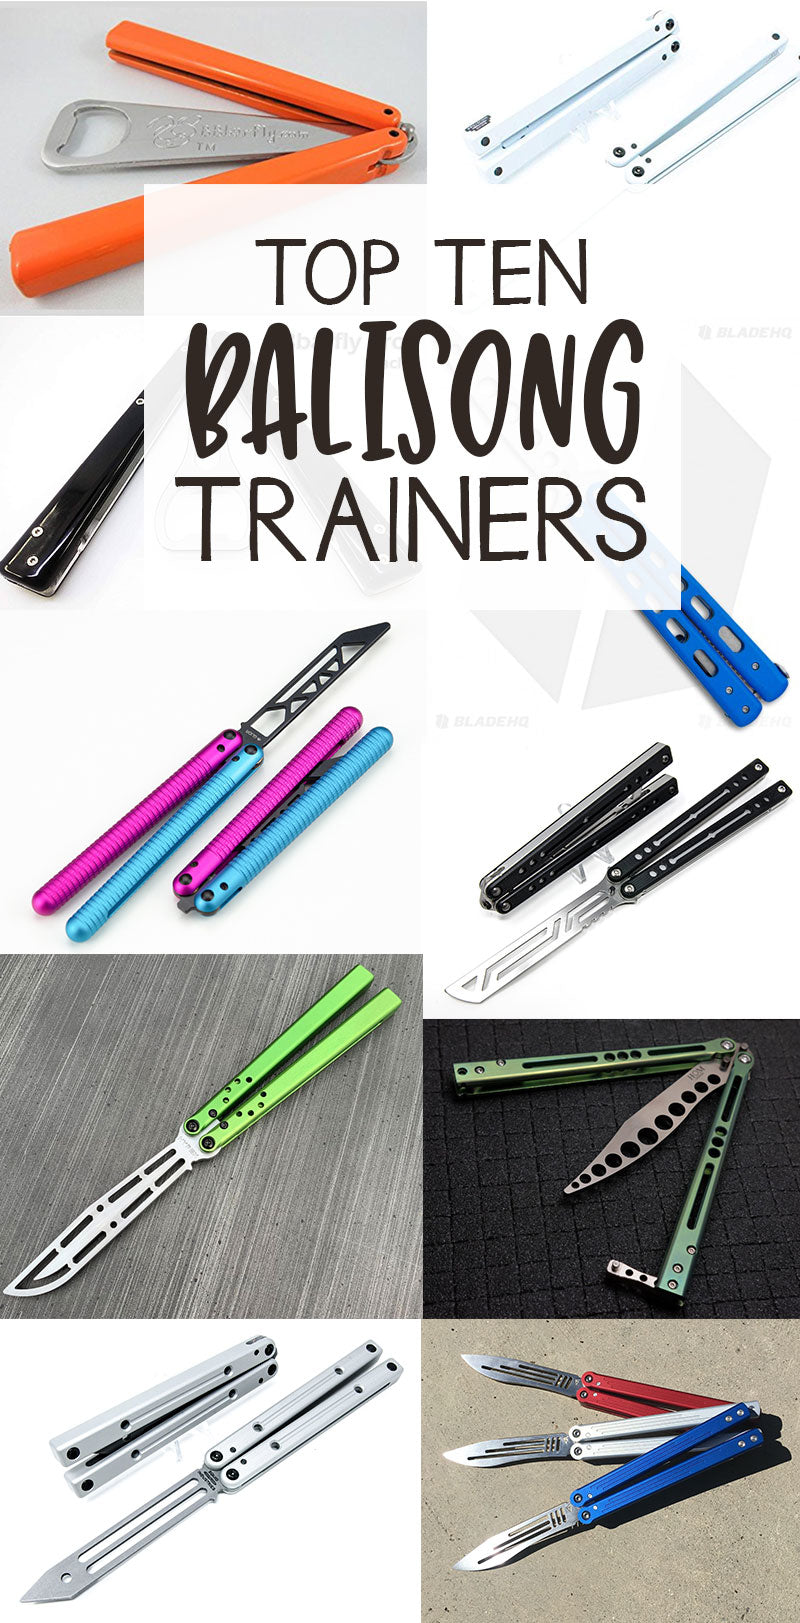 Top 10 Balisong Trainers